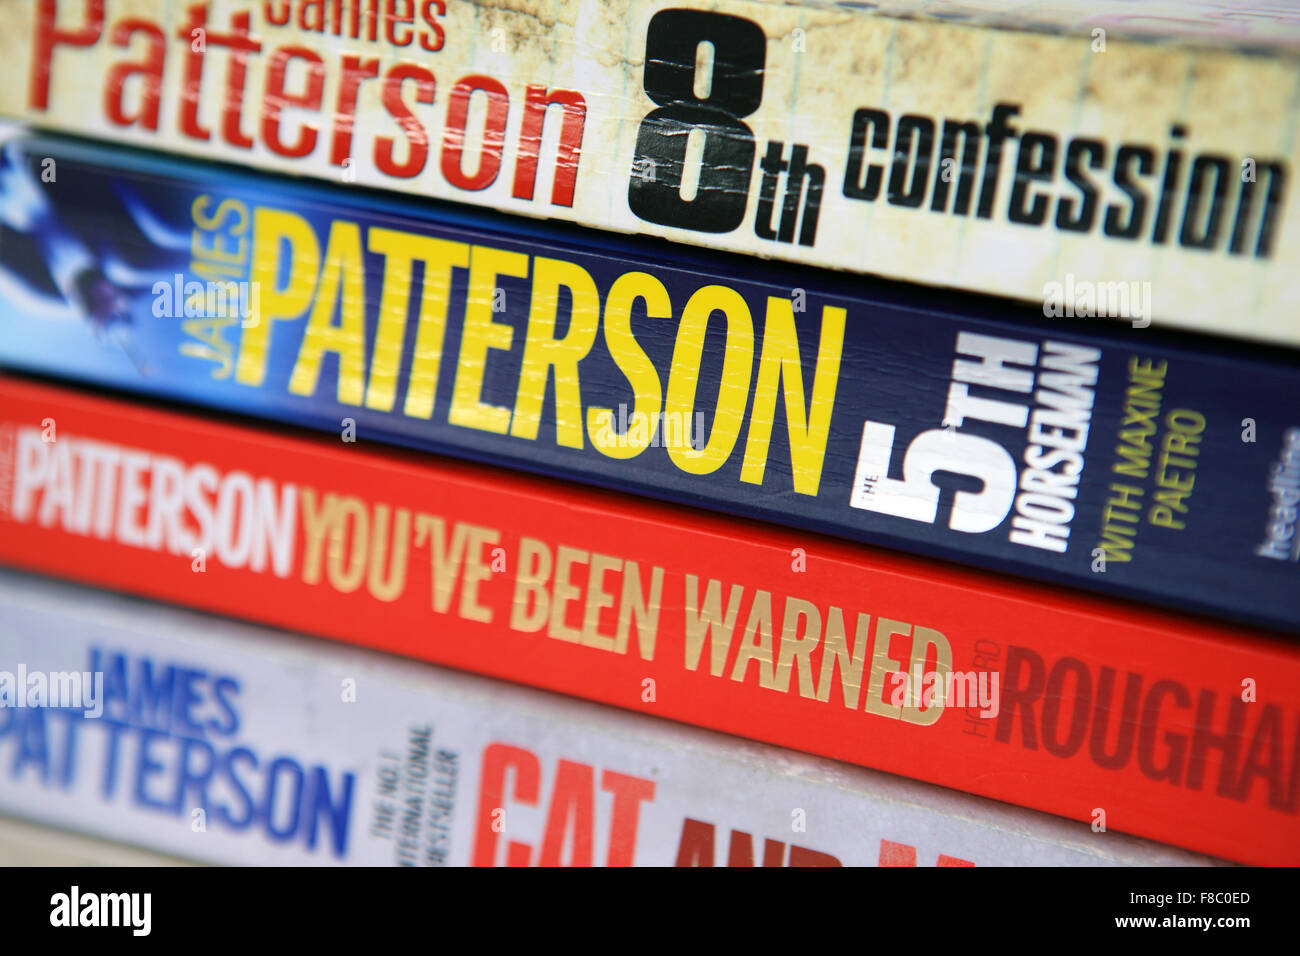 Novels by James Patterson an American author Stock Photo